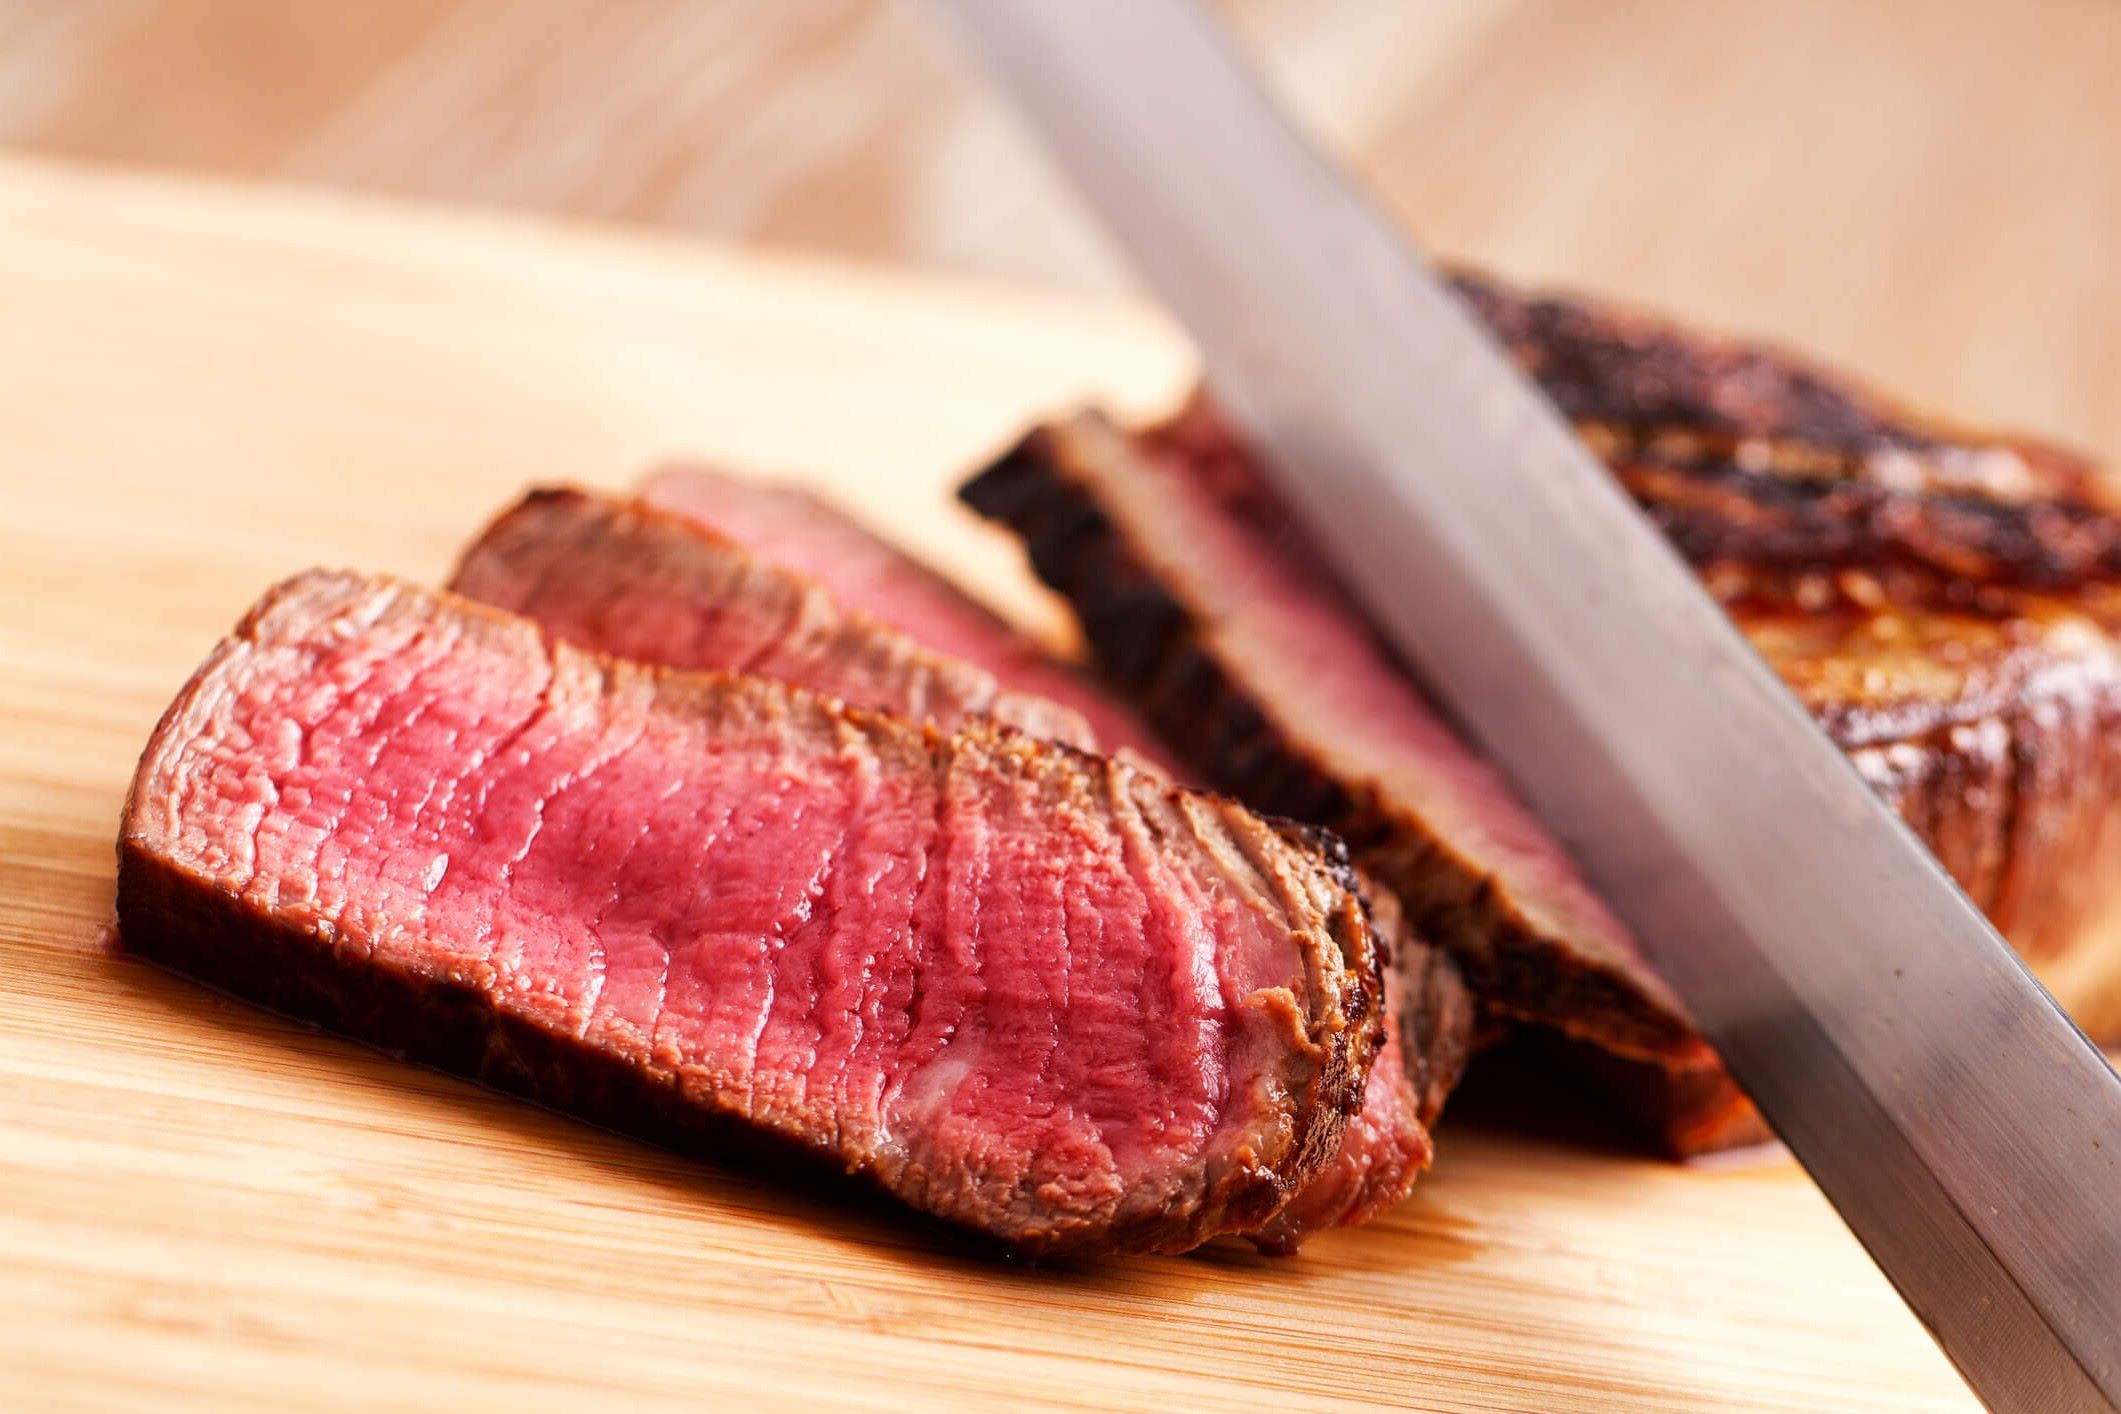 How To Properly Cut Steak Against The Grain